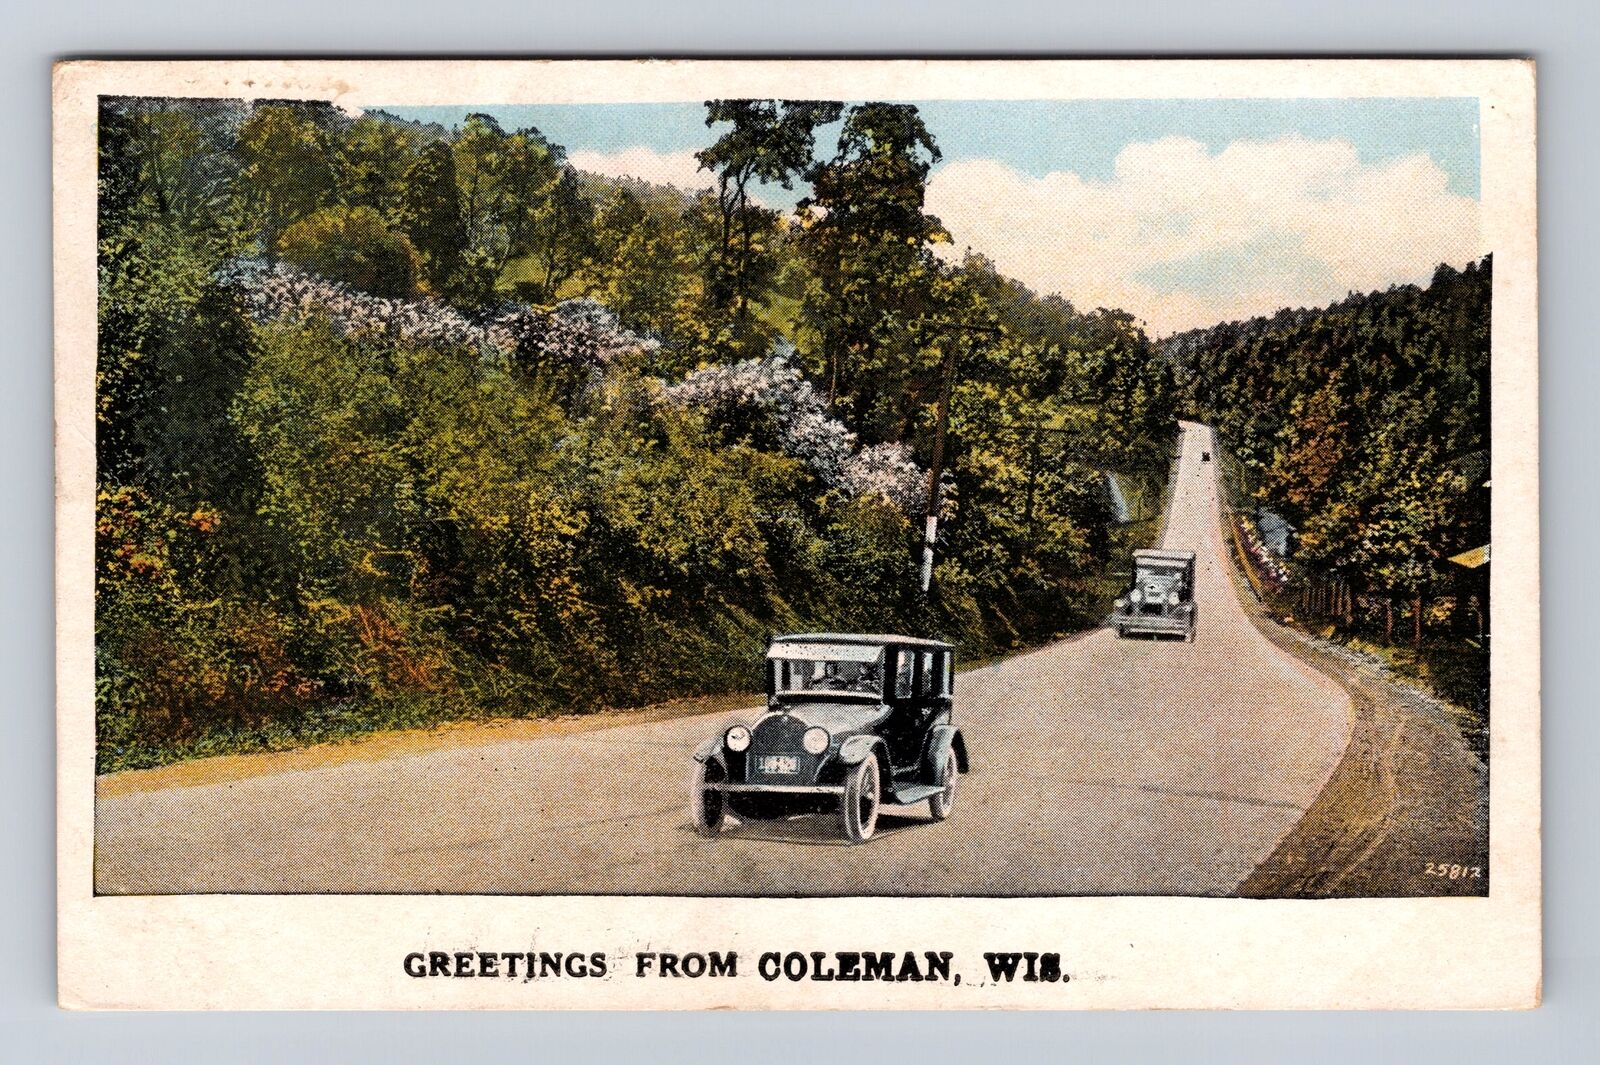 Coleman WI-Wisconsin, Scenic Greetings, Automobiles, Vintage c1931 Postcard